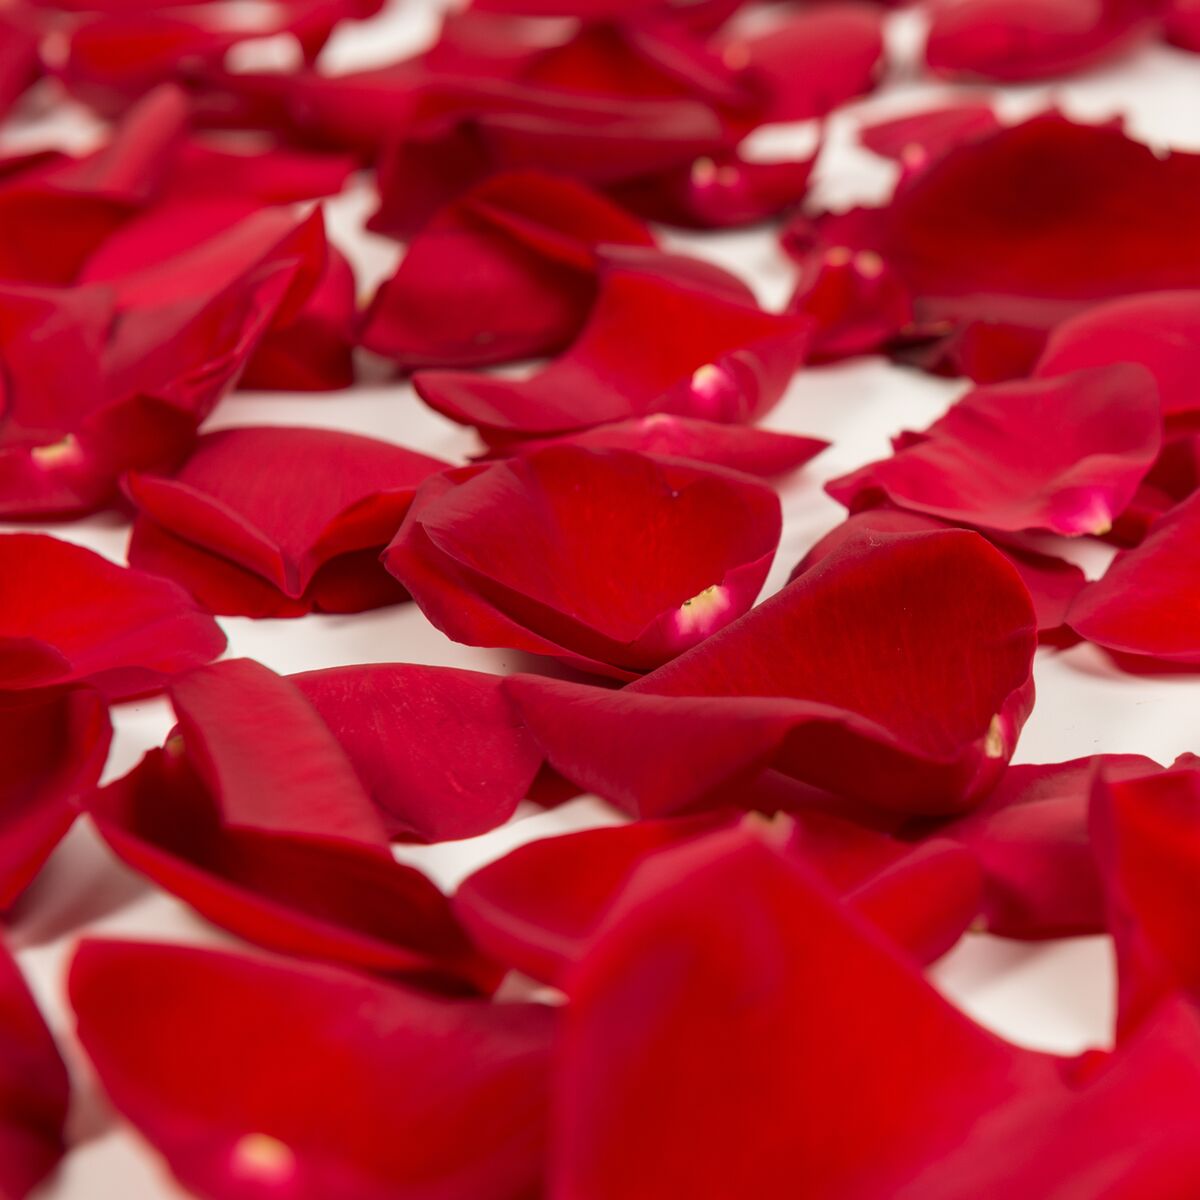 Rose Petals 3 Bags of Red Farm Direct Fresh Cut Flower Petals by Bloomingmore - image 1 of 5